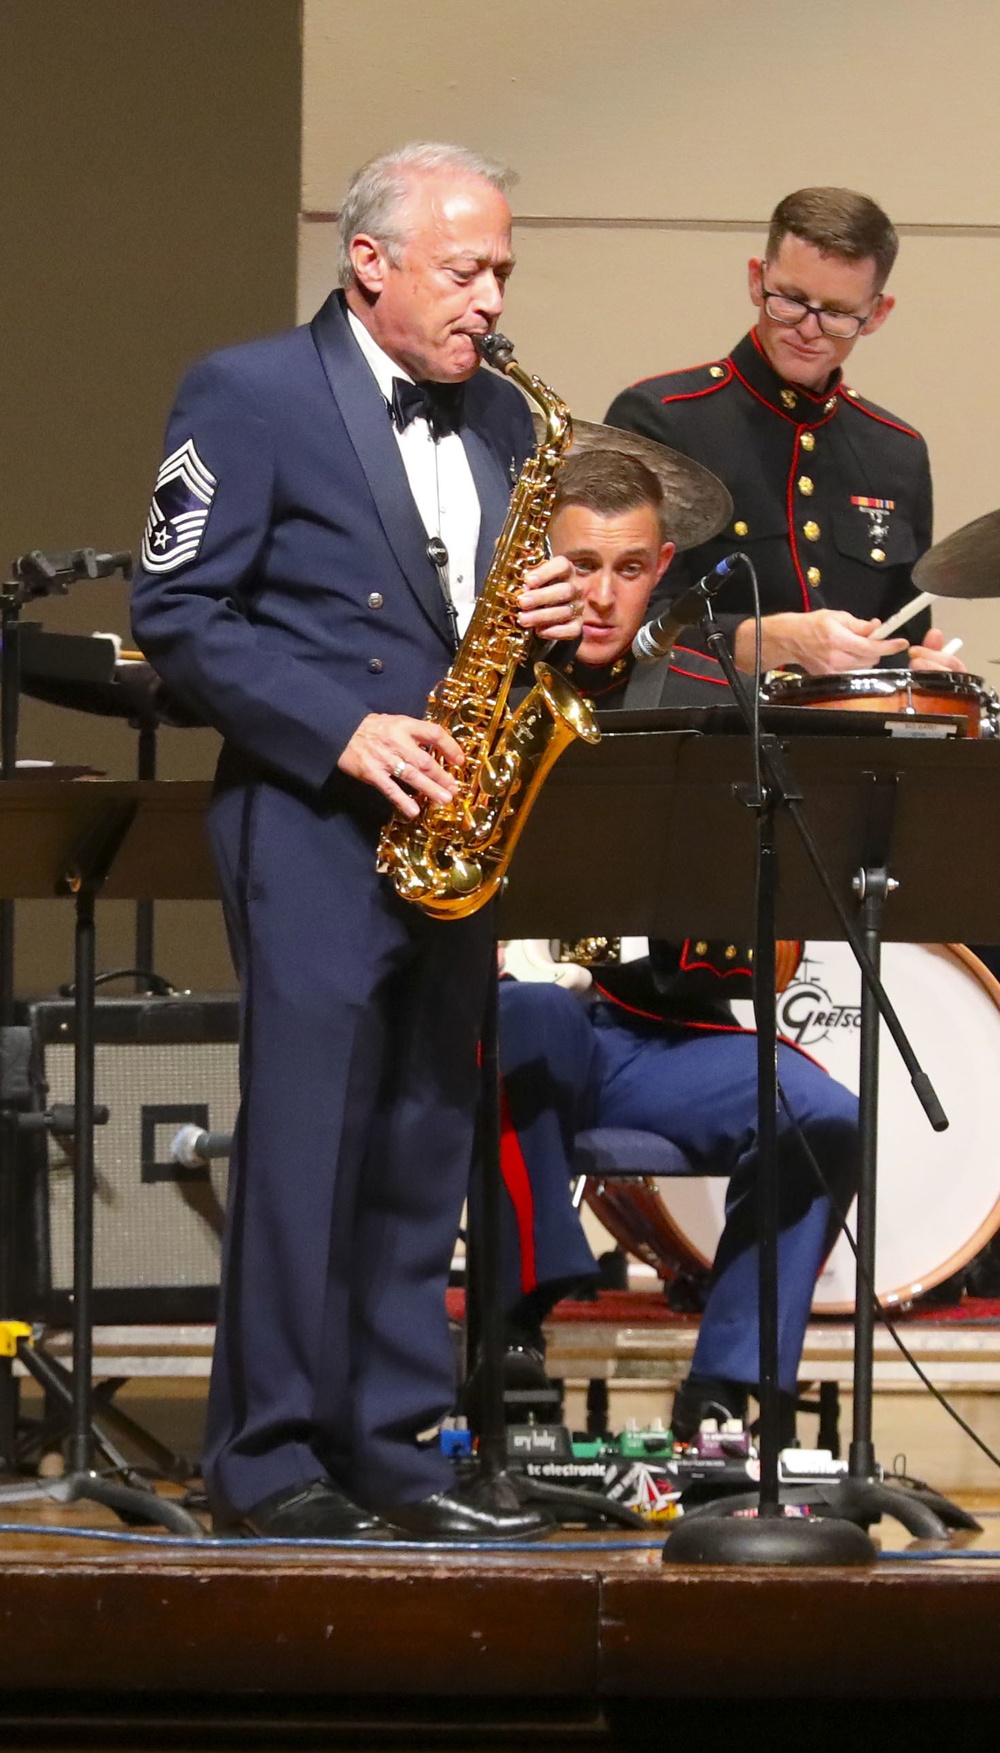 Marine Corps Jazz Orchestra performs at TCU